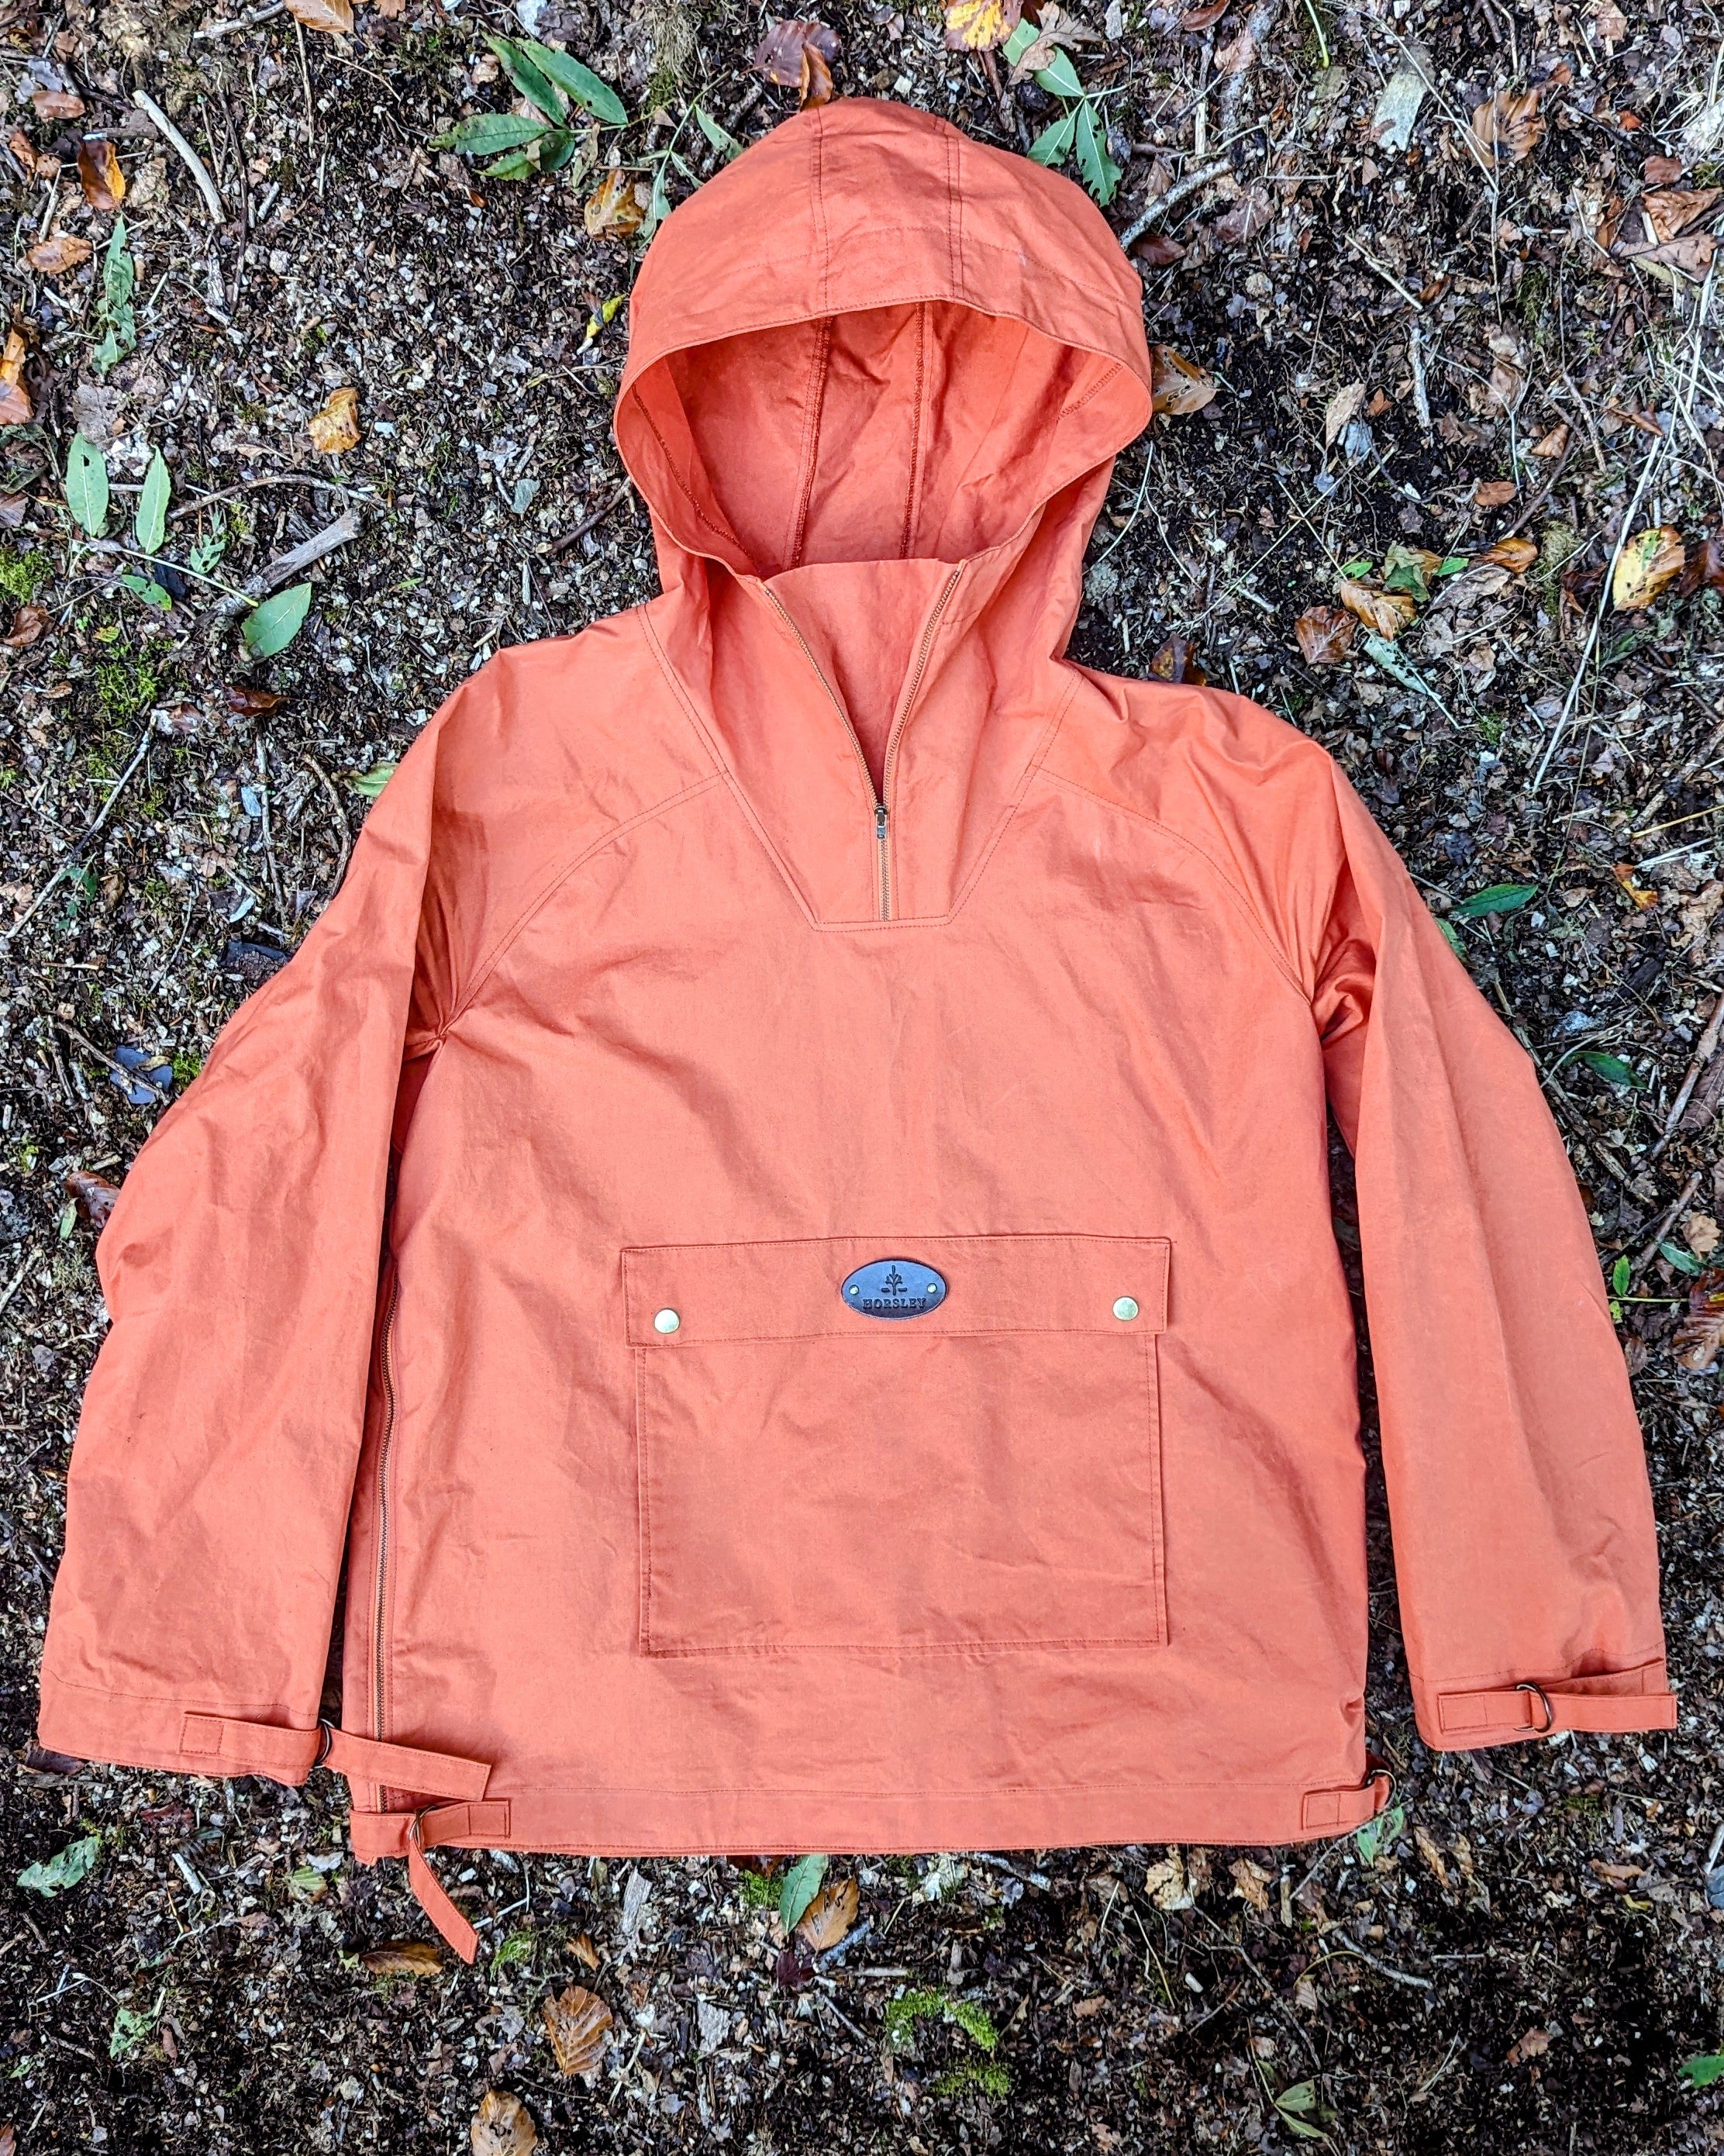 The Norwester Smock - Unlined